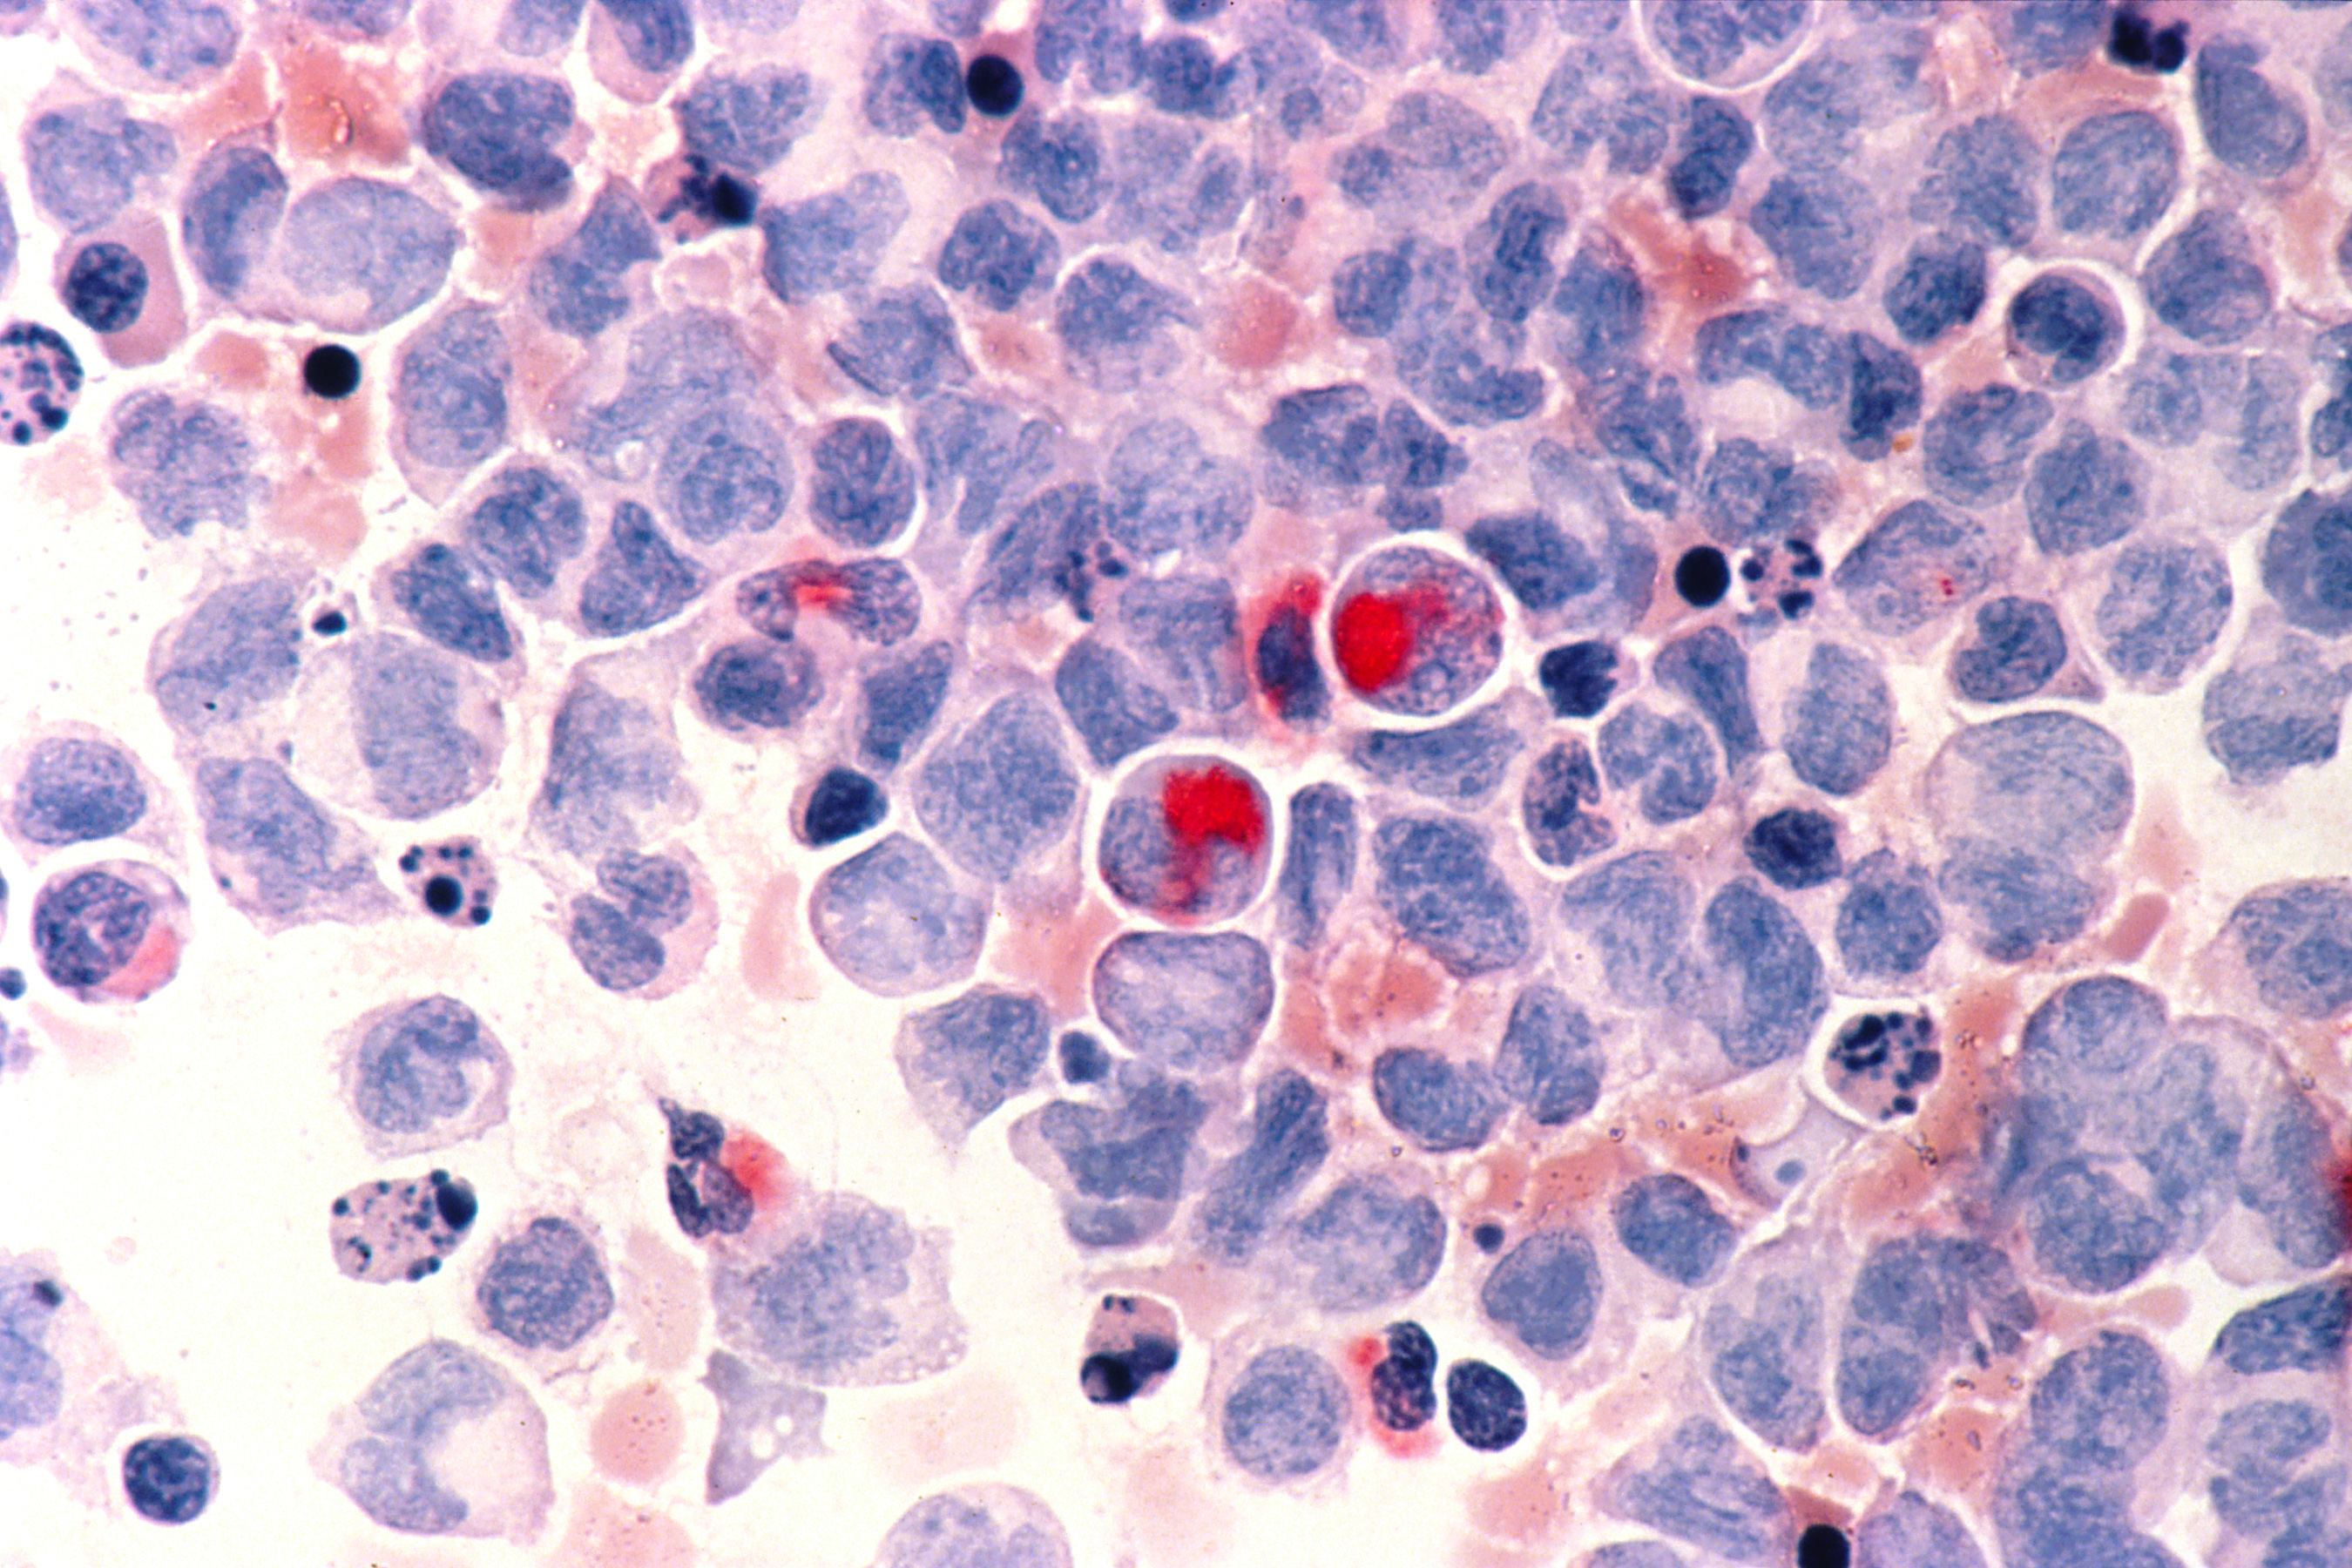 Human cells with acute myelocytic leukemia (AML) in the pericardial fluid, shown with an esterase stain at 400x. (credit National Cancer Institute)